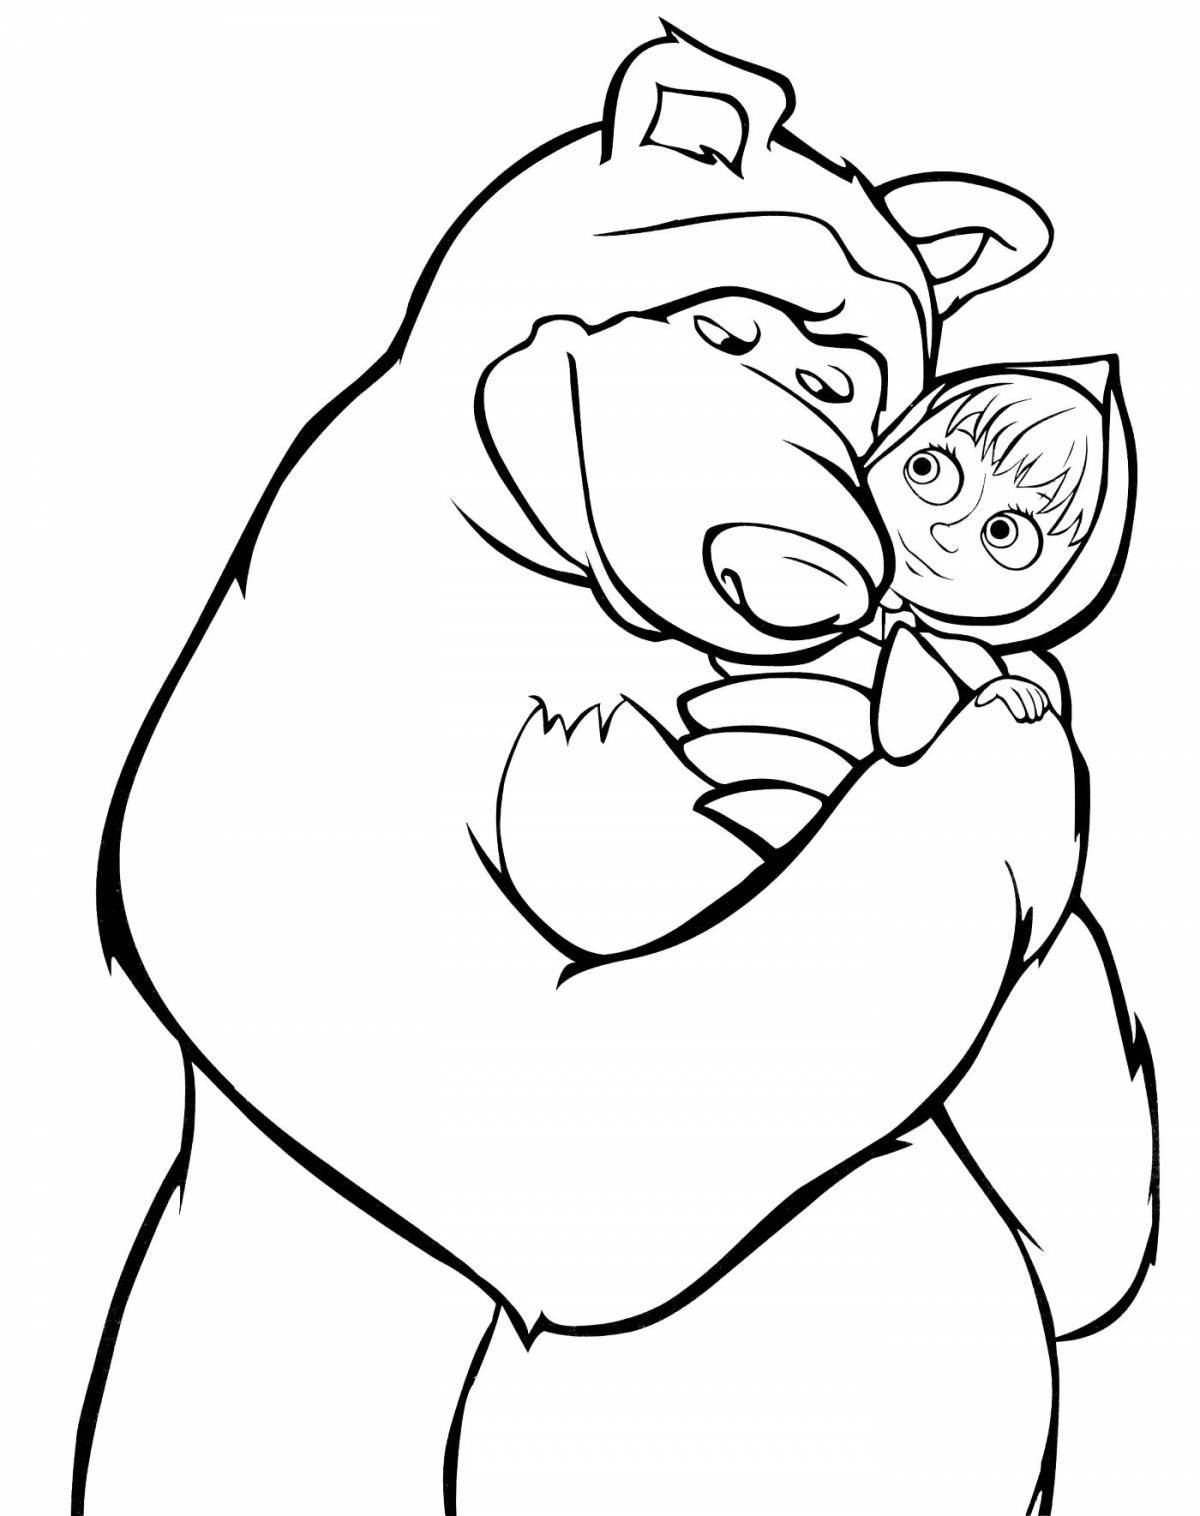 Coloring witty bear from masha and bear